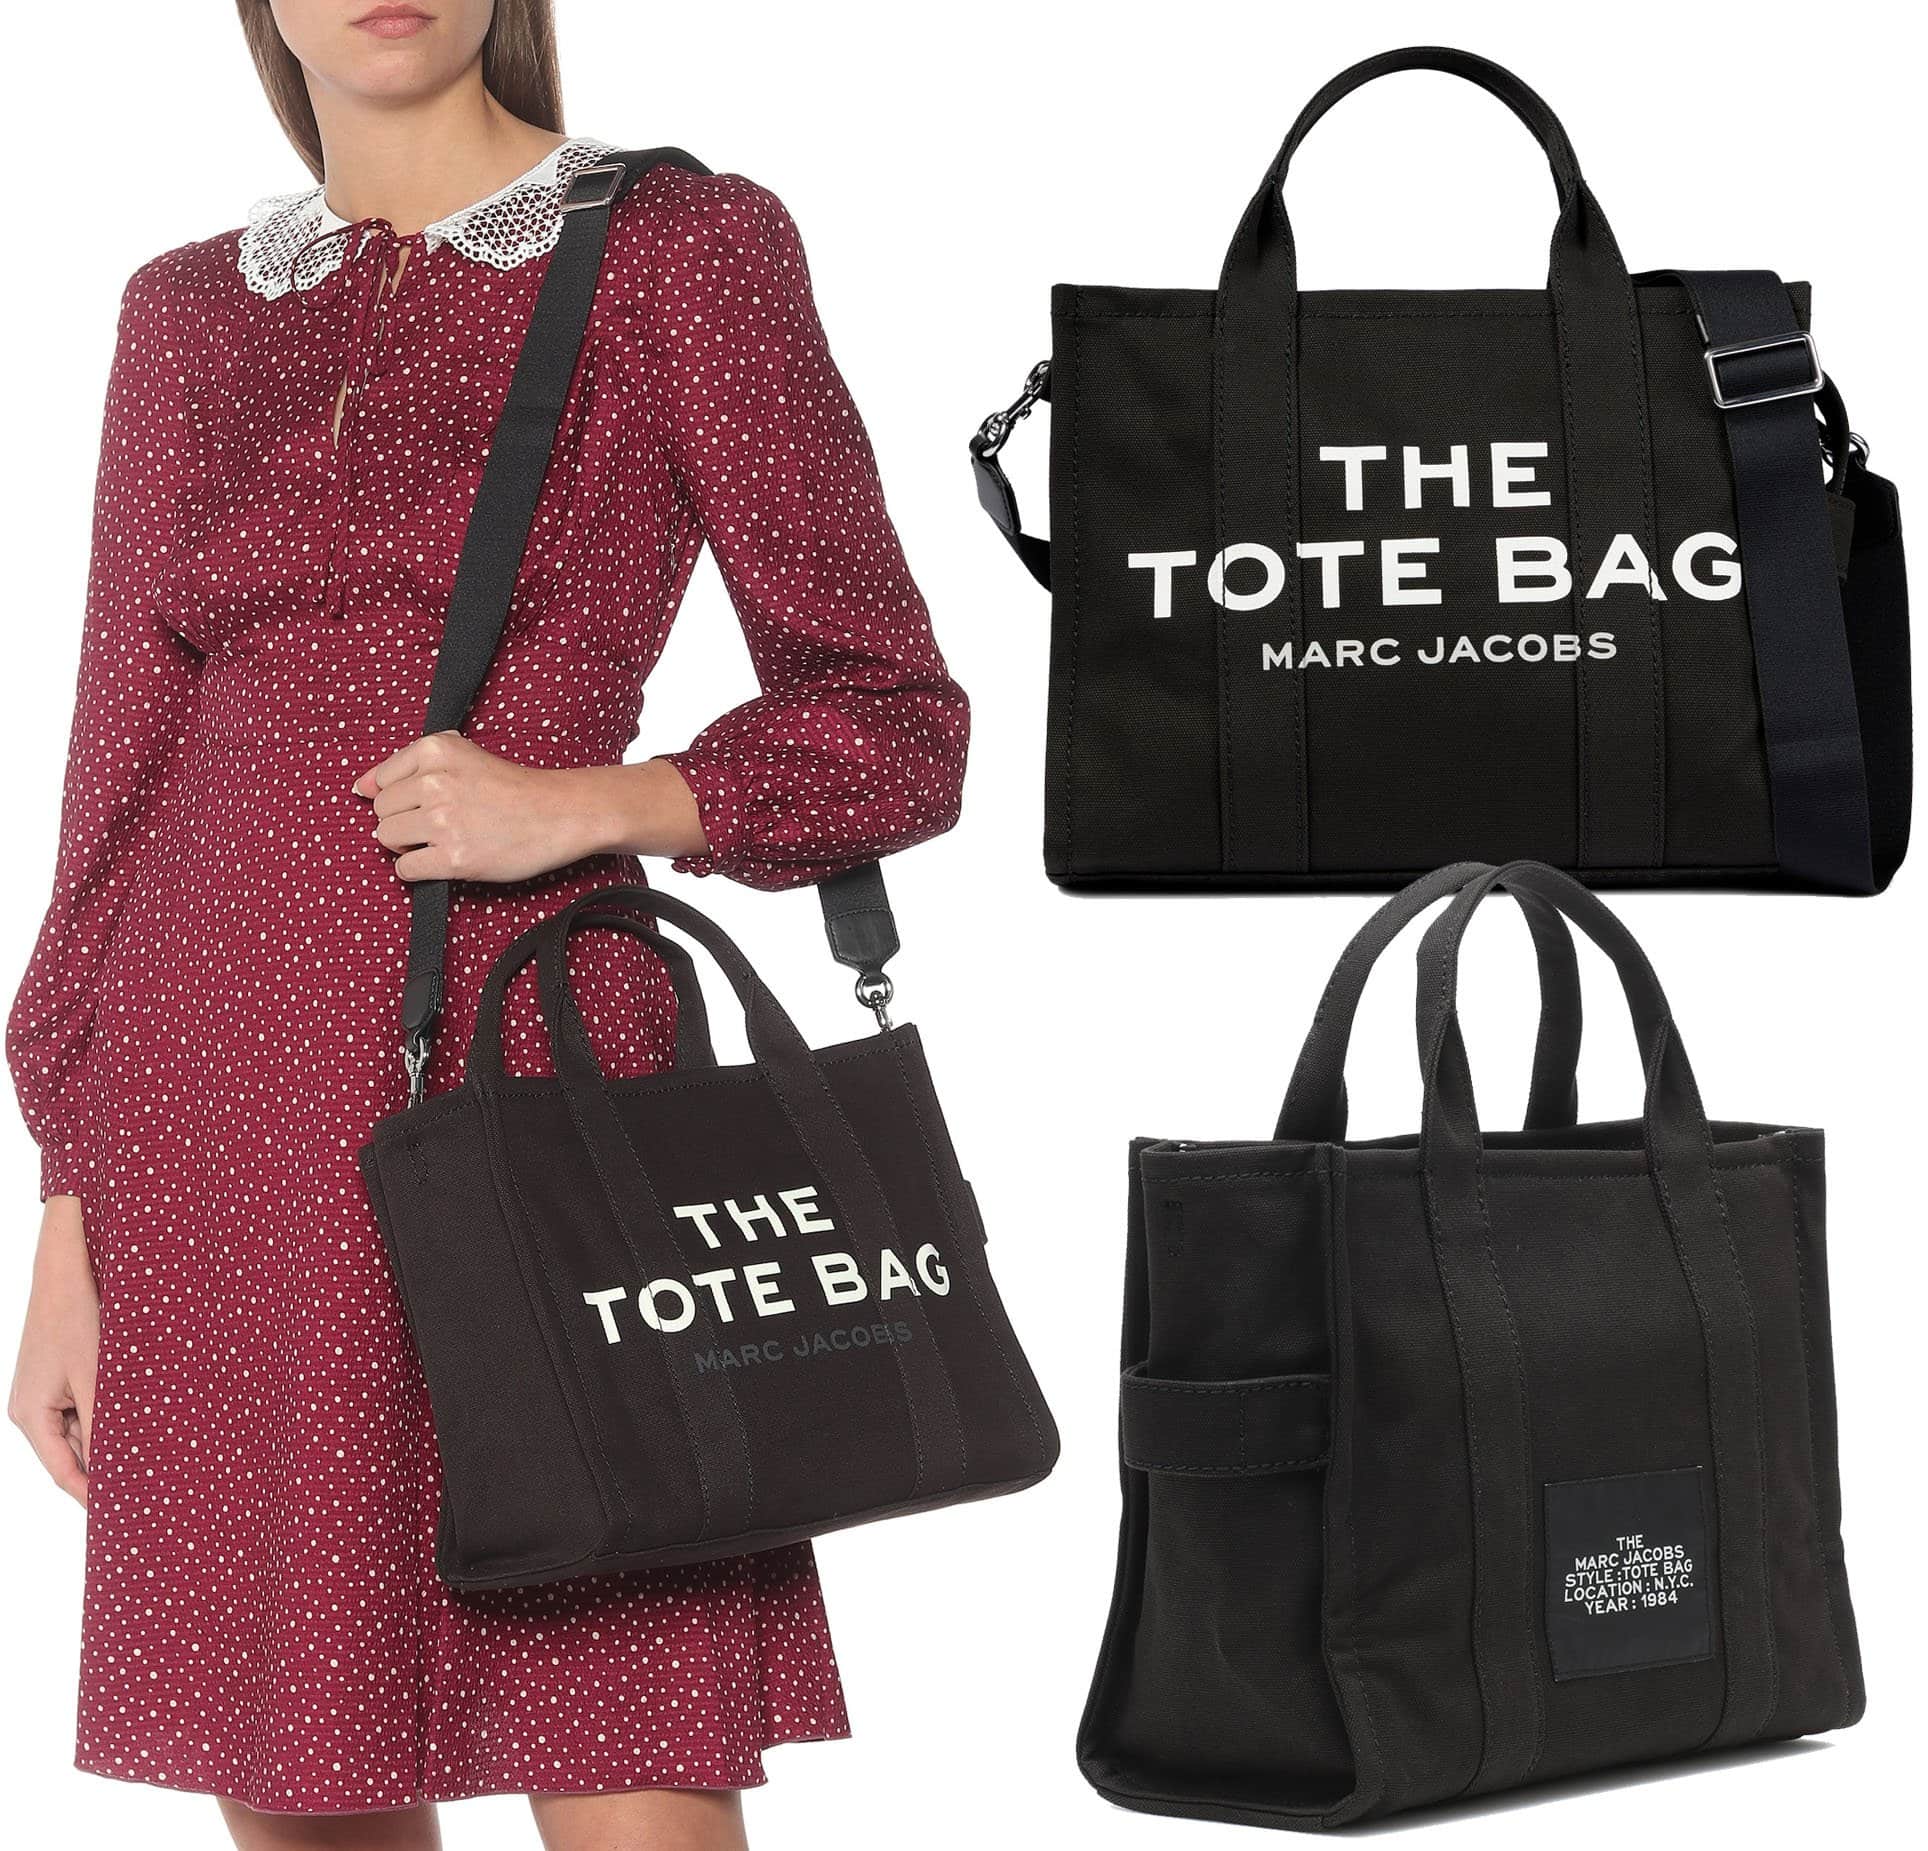 Perfect for overnight stays, The Traveler Small Tote bag has a spacious interior, a logo detailing to the front and rear, a detachable shoulder strap, and rounded top handles